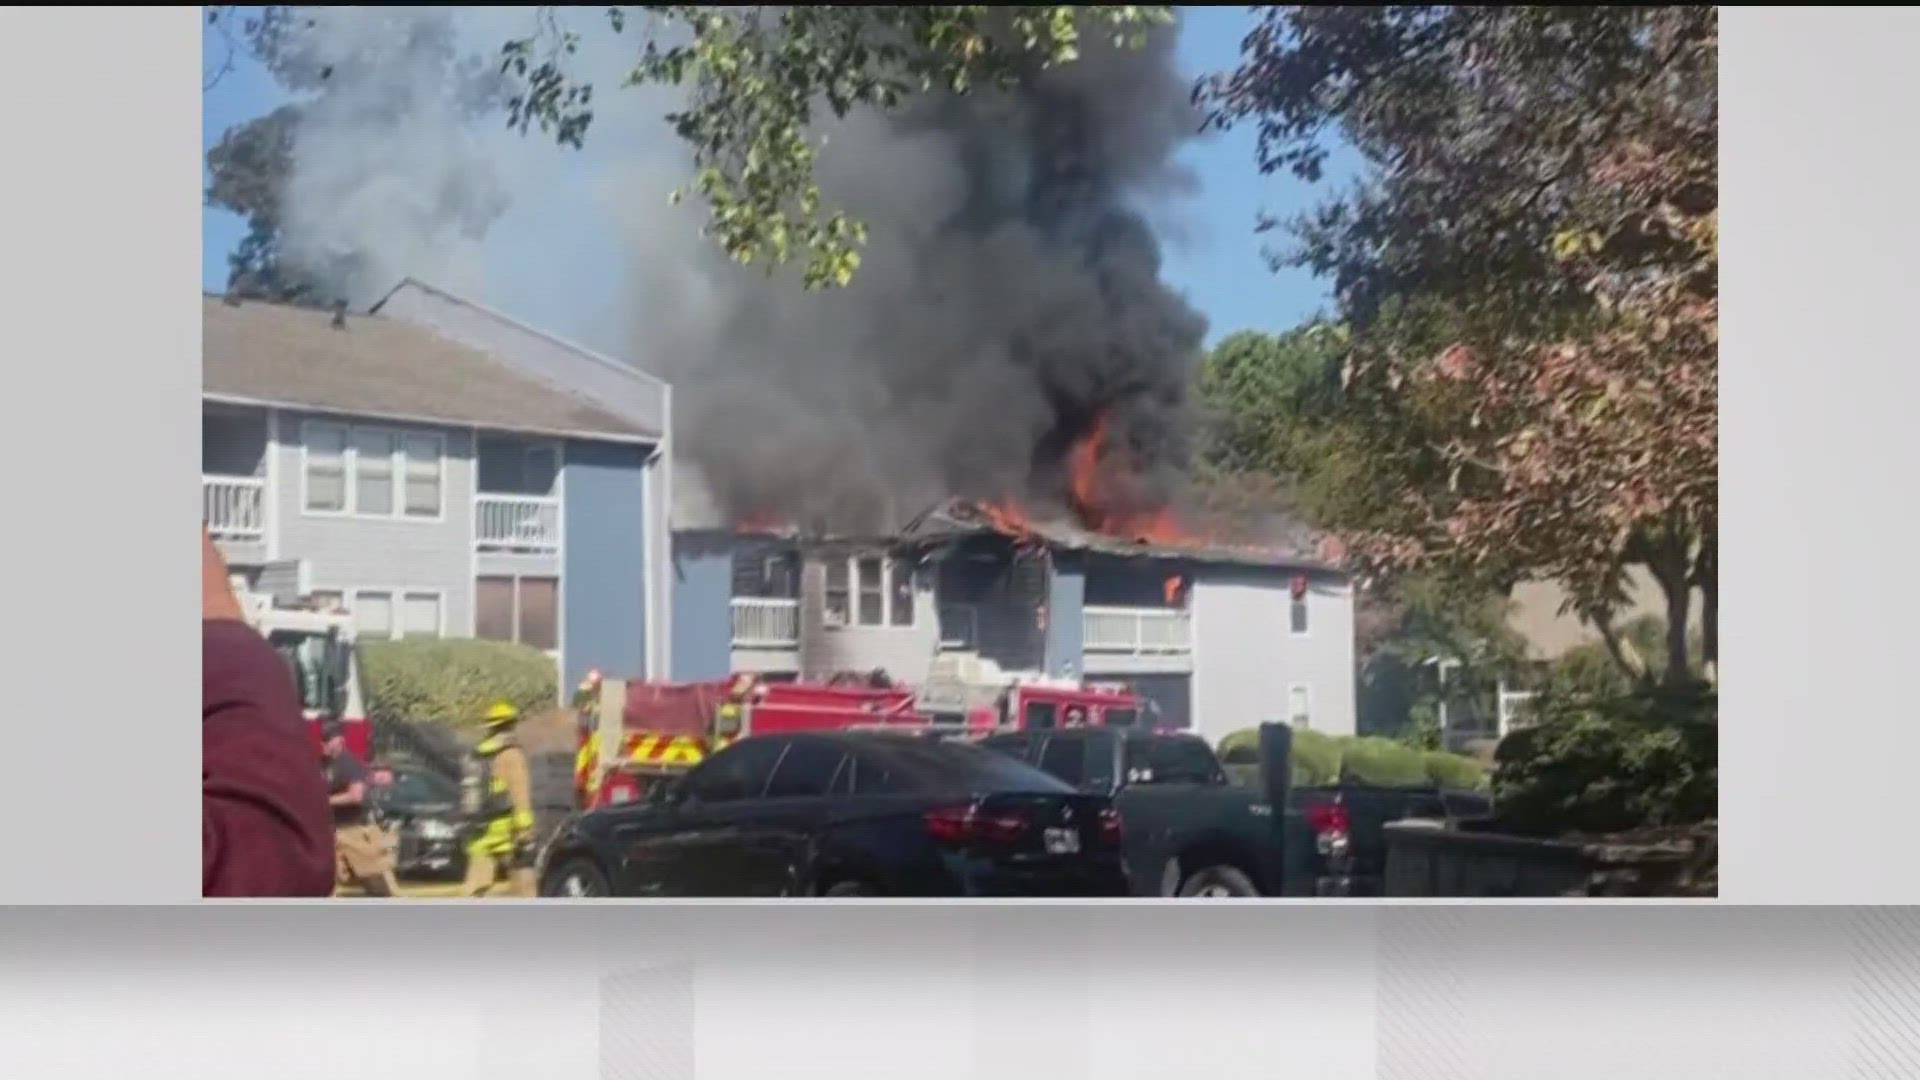 The fire broke out around 11 a.m. at the East Cobb Apartments on Franklin Gateway, which is off I-75 and Delk Road.